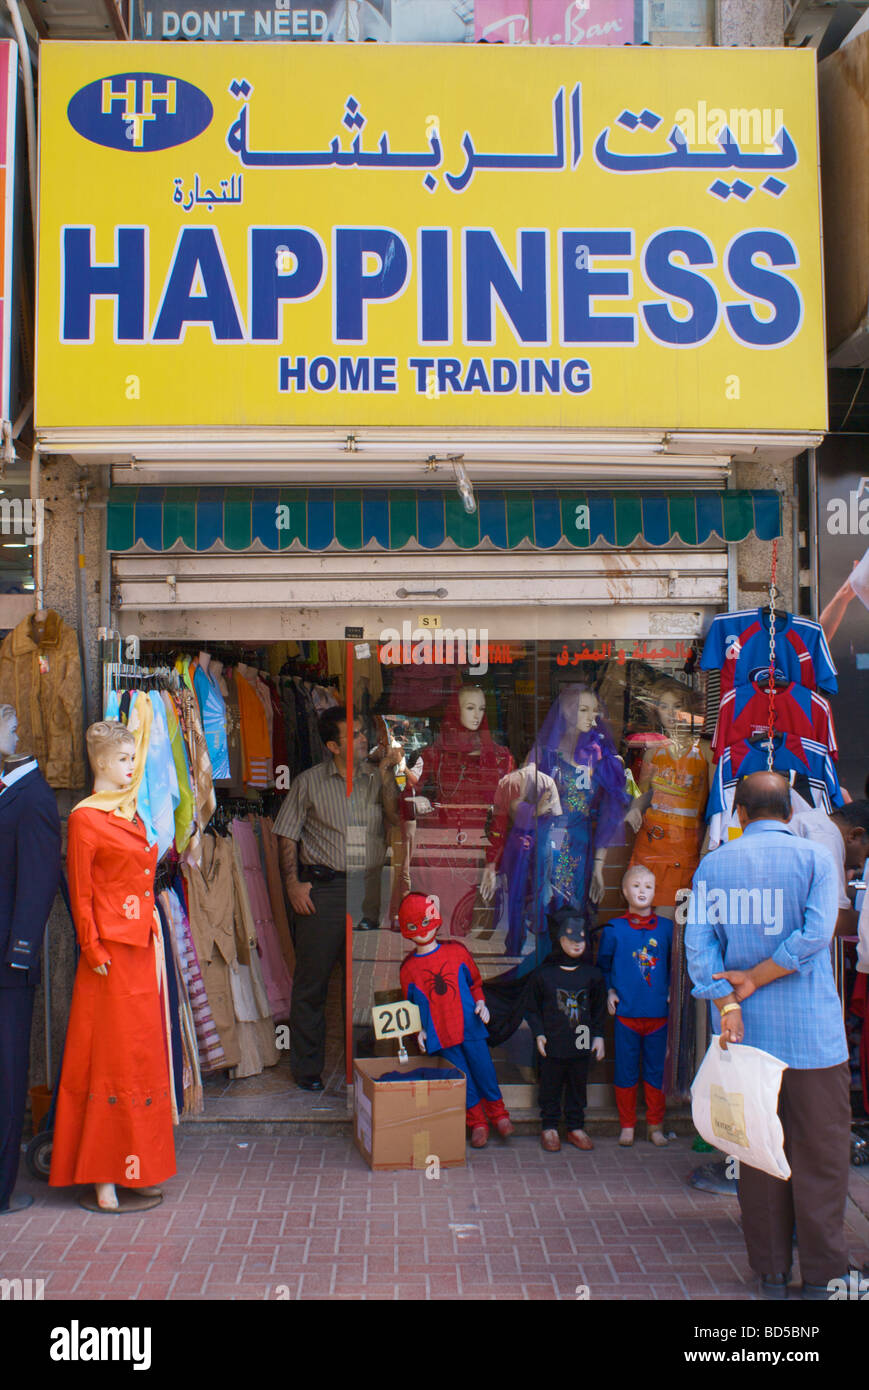 Fashion store 'Happiness Home Trading' in Deira, Dubai, United Arab Emirates (UAE) with funny costumes and poster 'I don't need' Stock Photo